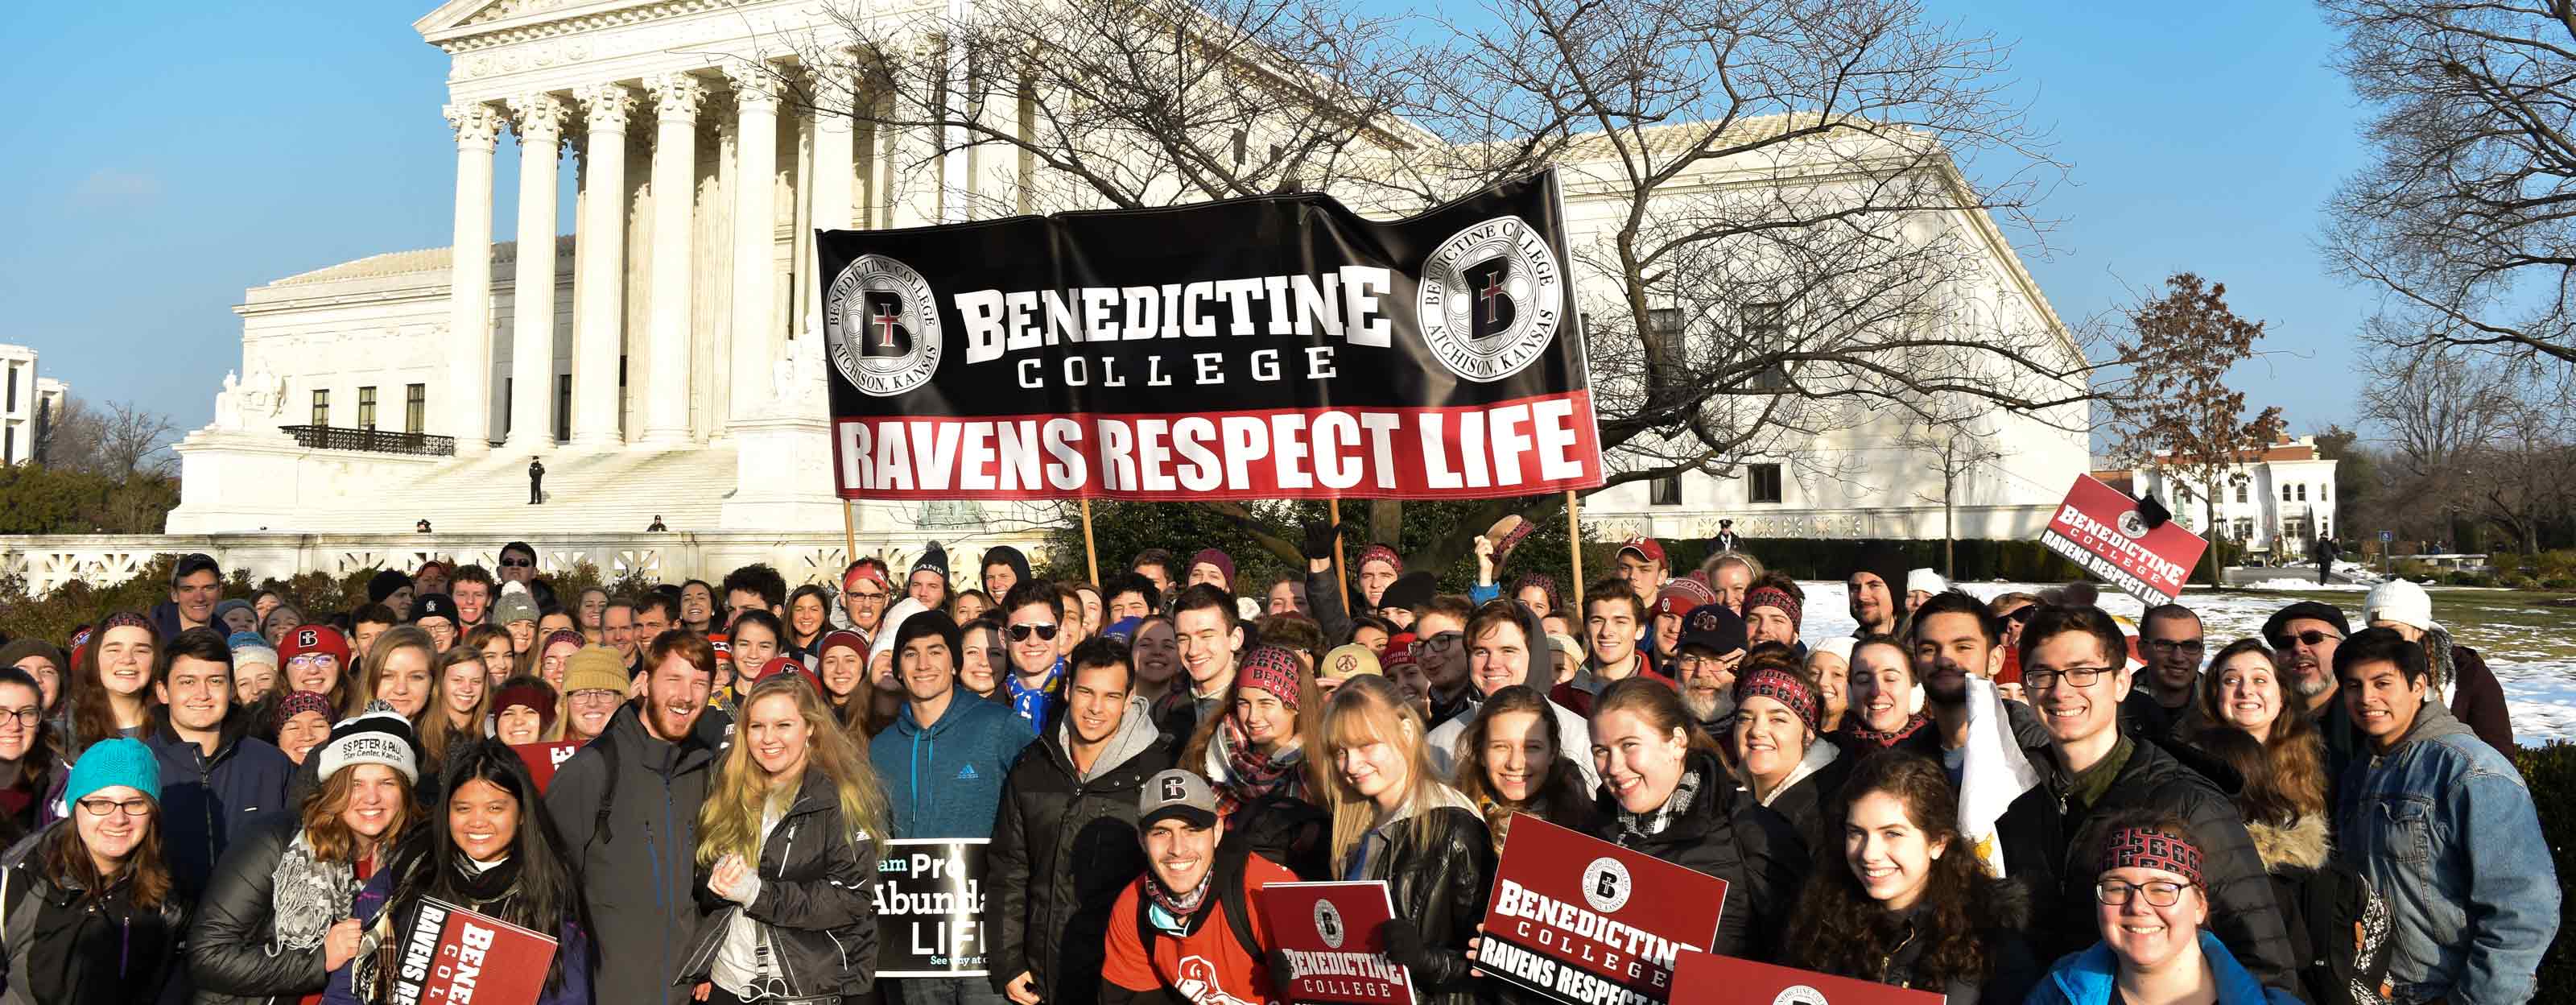 Pro-Life Memes for Pro-Life Week – Benedictine College Media & Culture